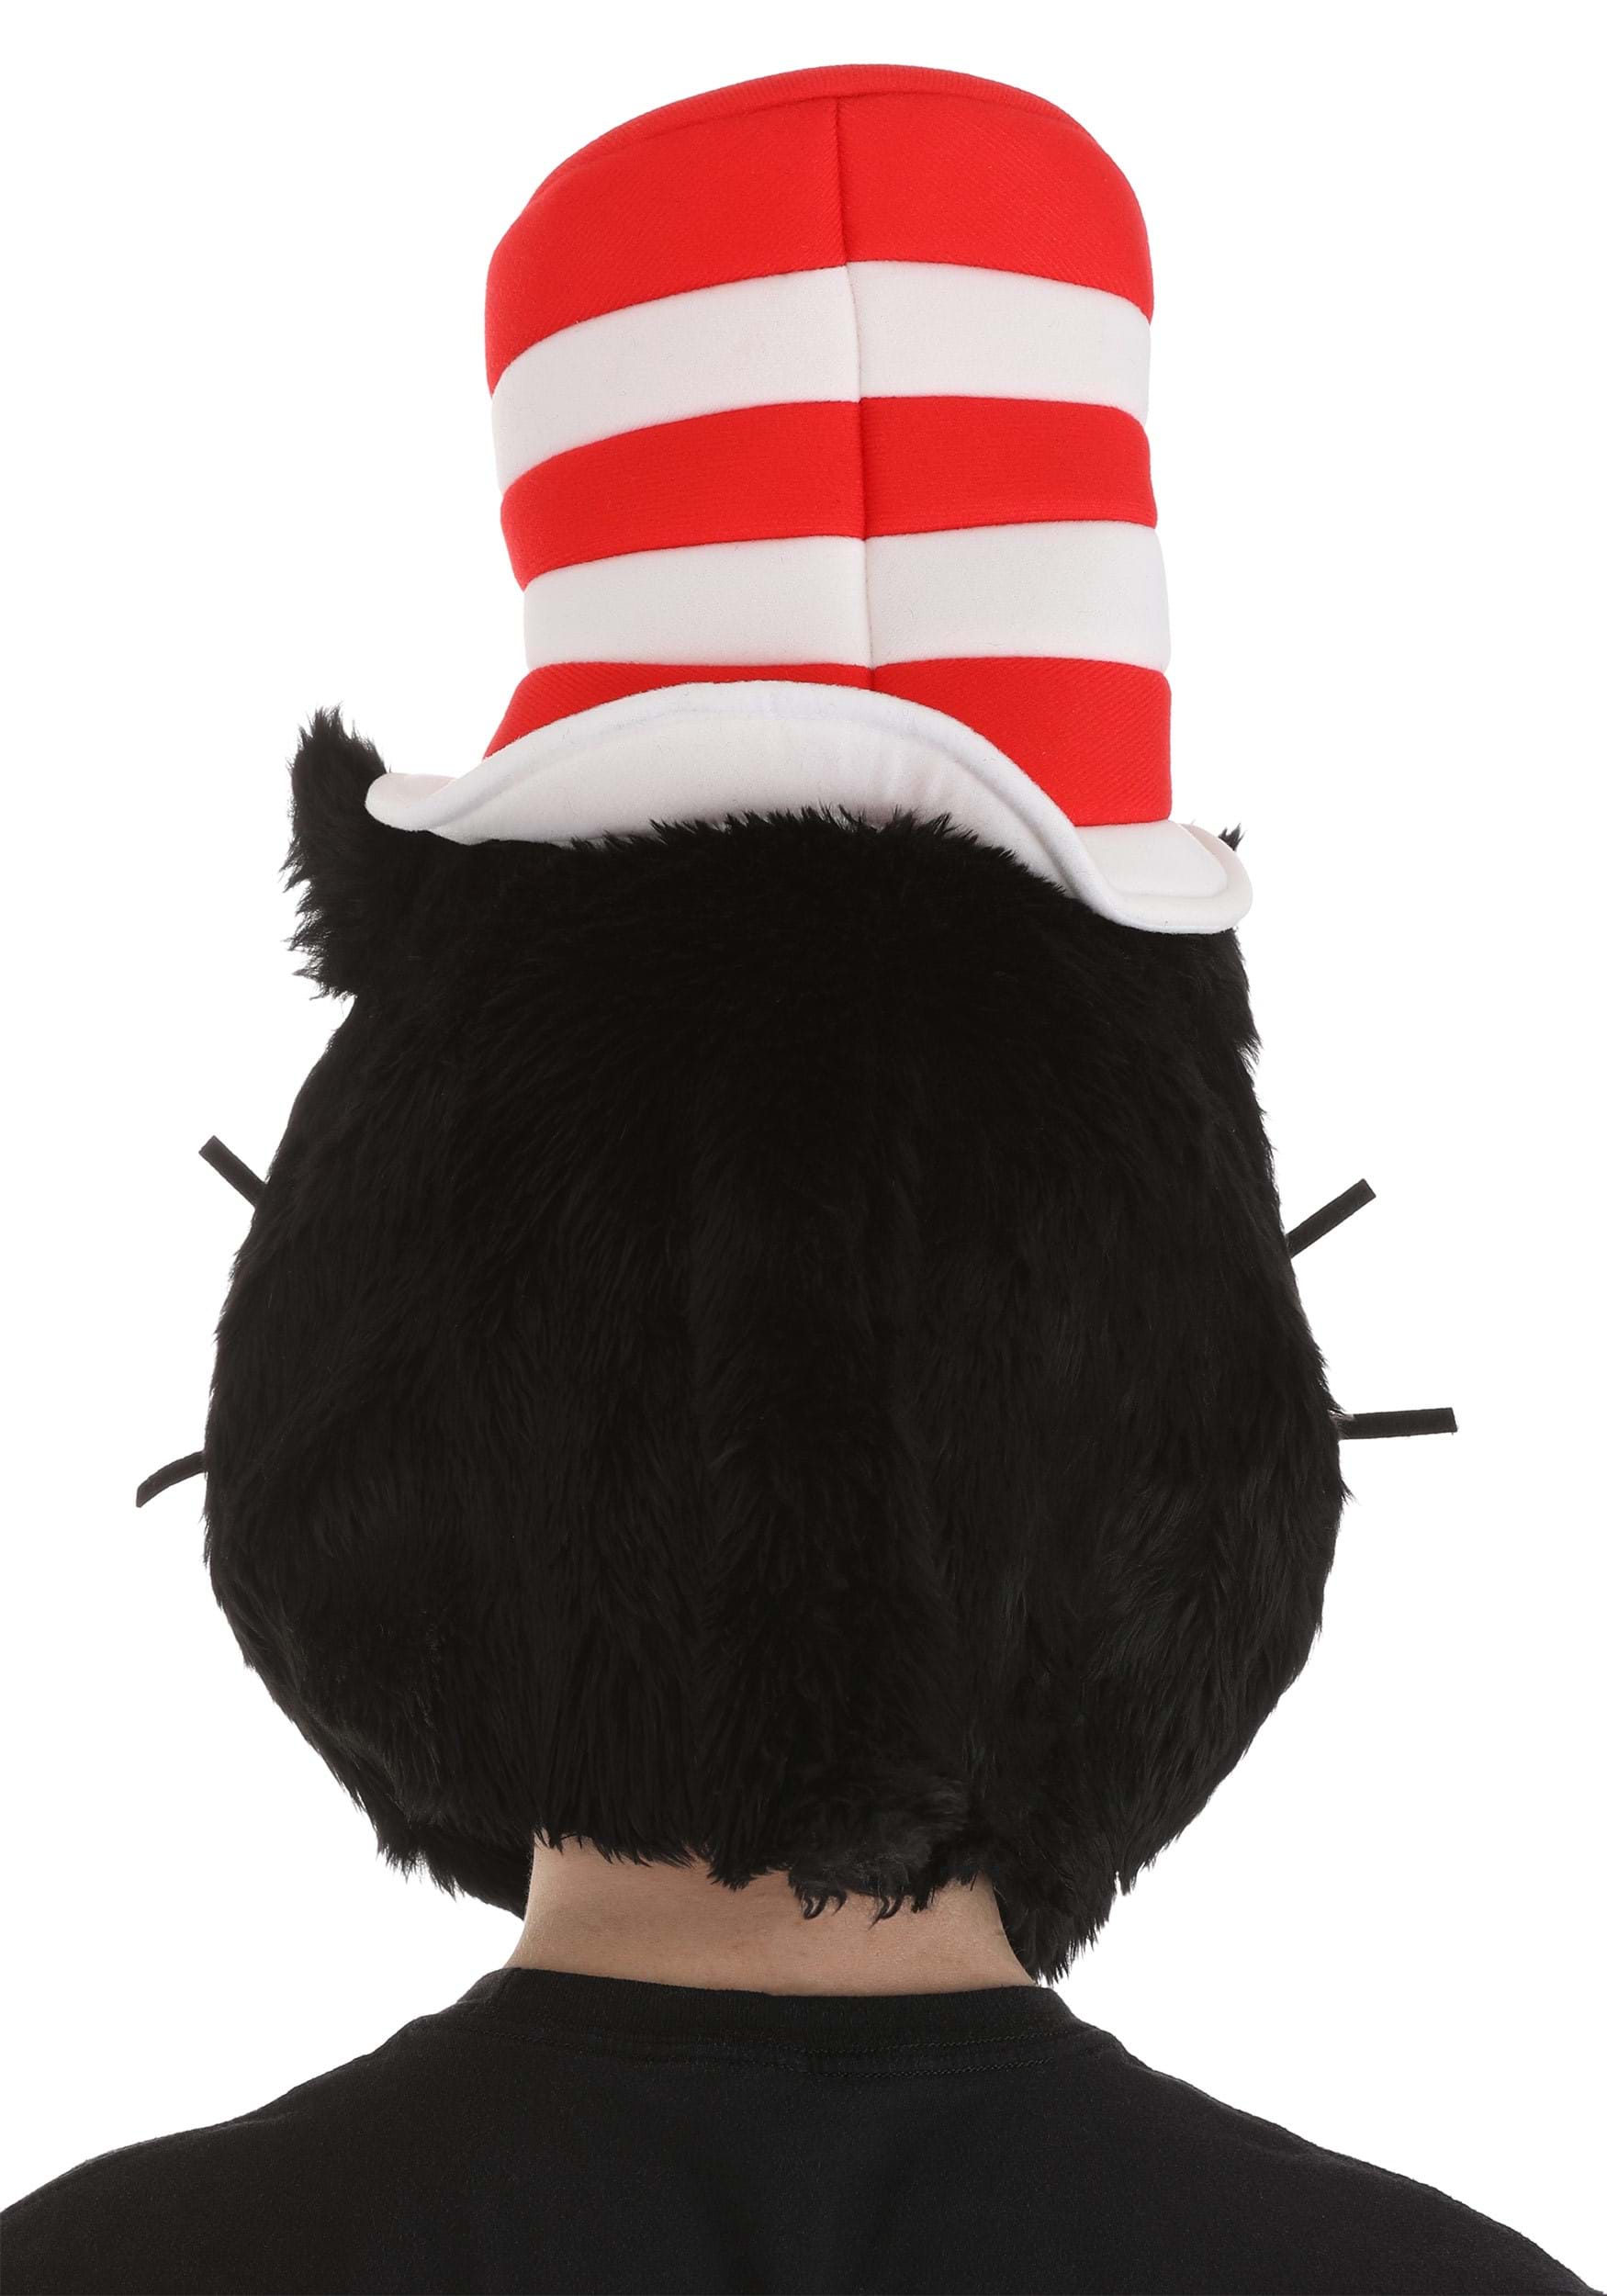 The Cat in the Hat - Vacuform Mask & Hat Kit